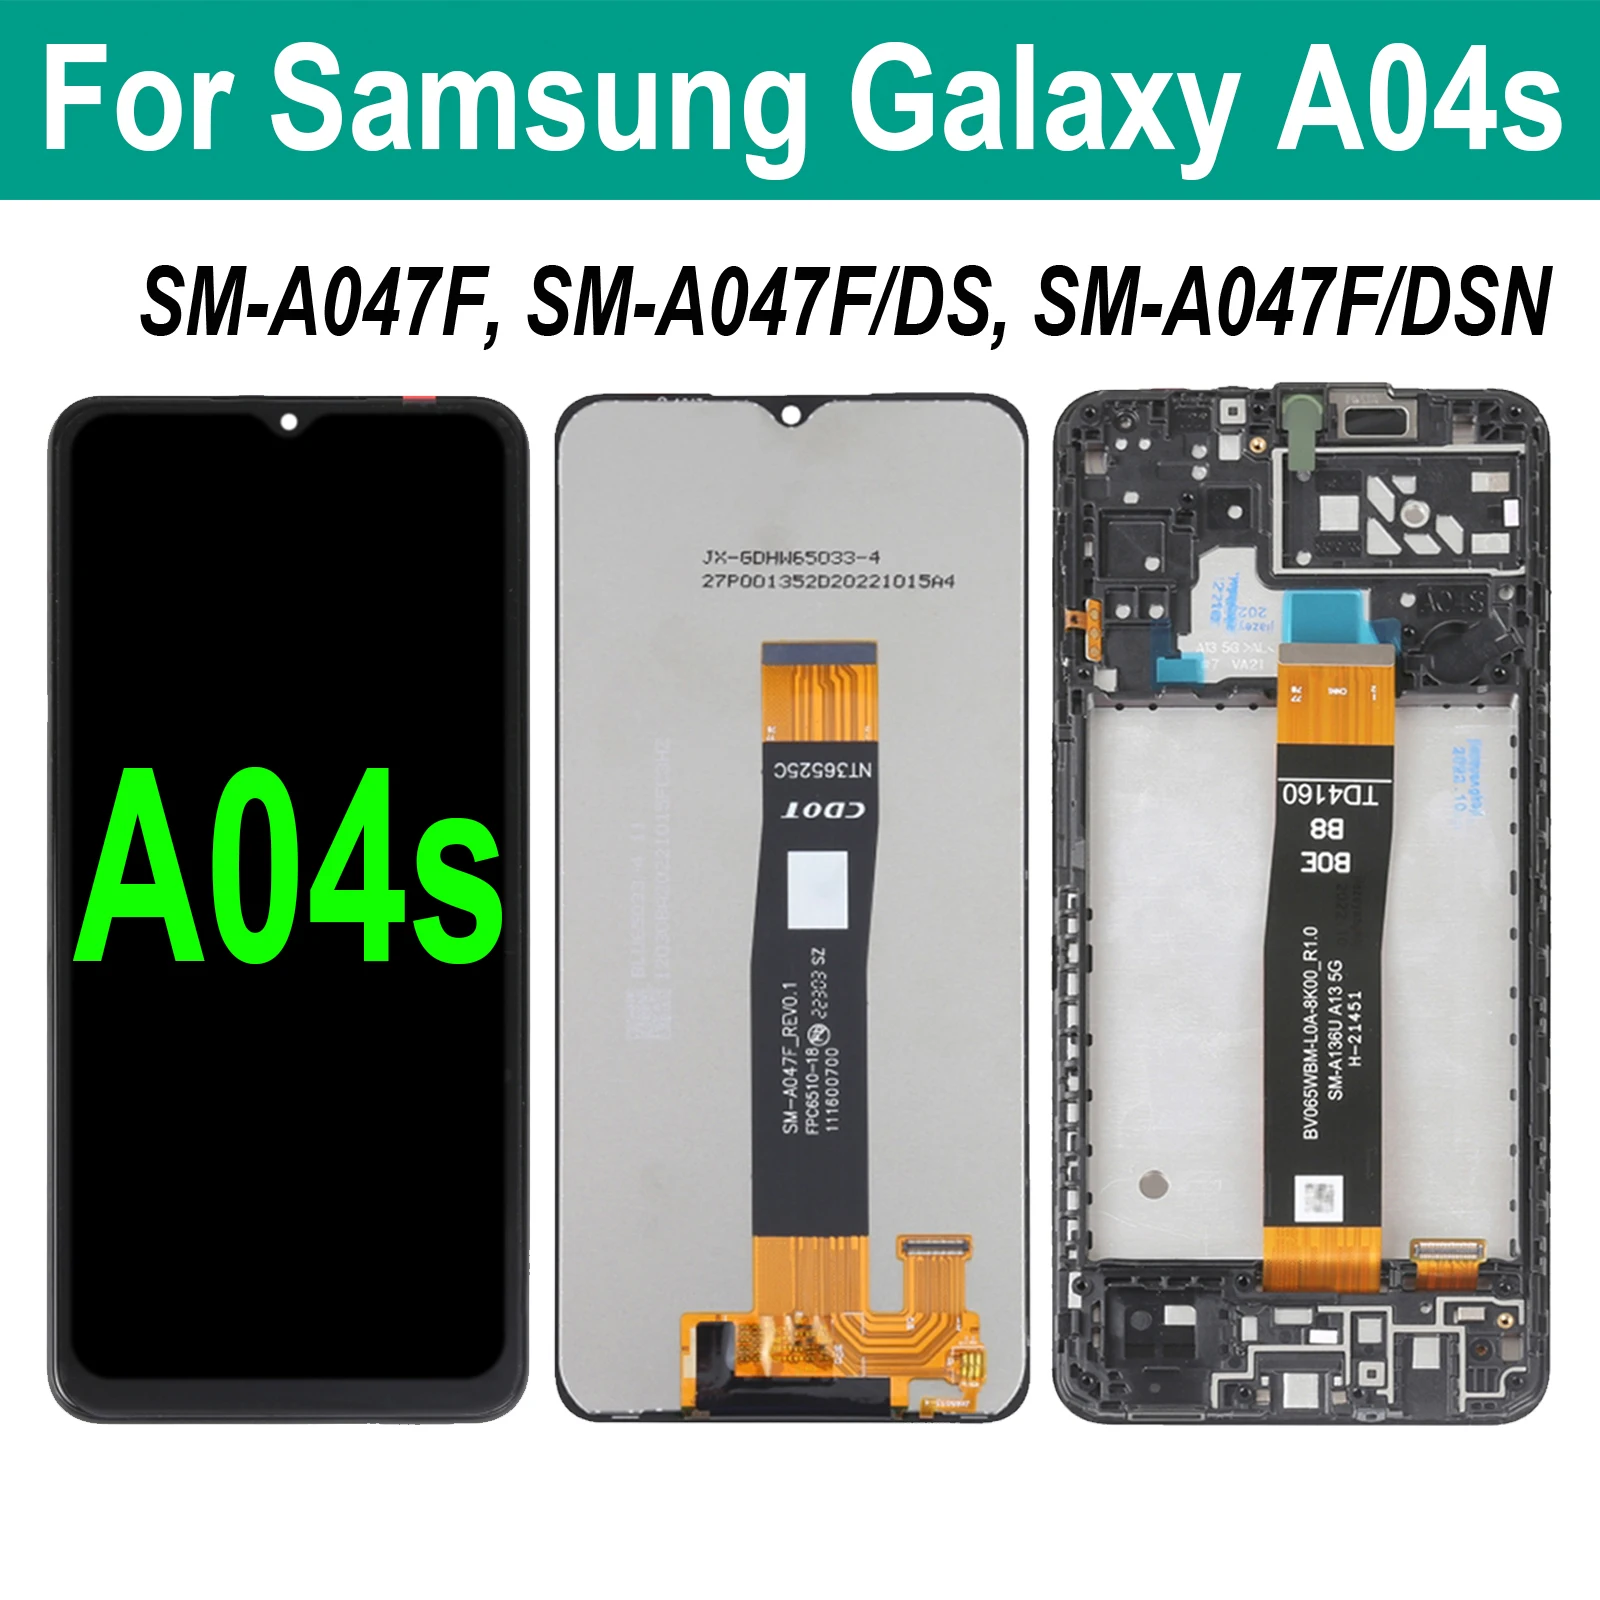 

6.5'' Original For Samsung Galaxy A04s A047 SM-A047F A047F/DS A047F/DSN LCD Display Touch Screen Digitizer Assembly